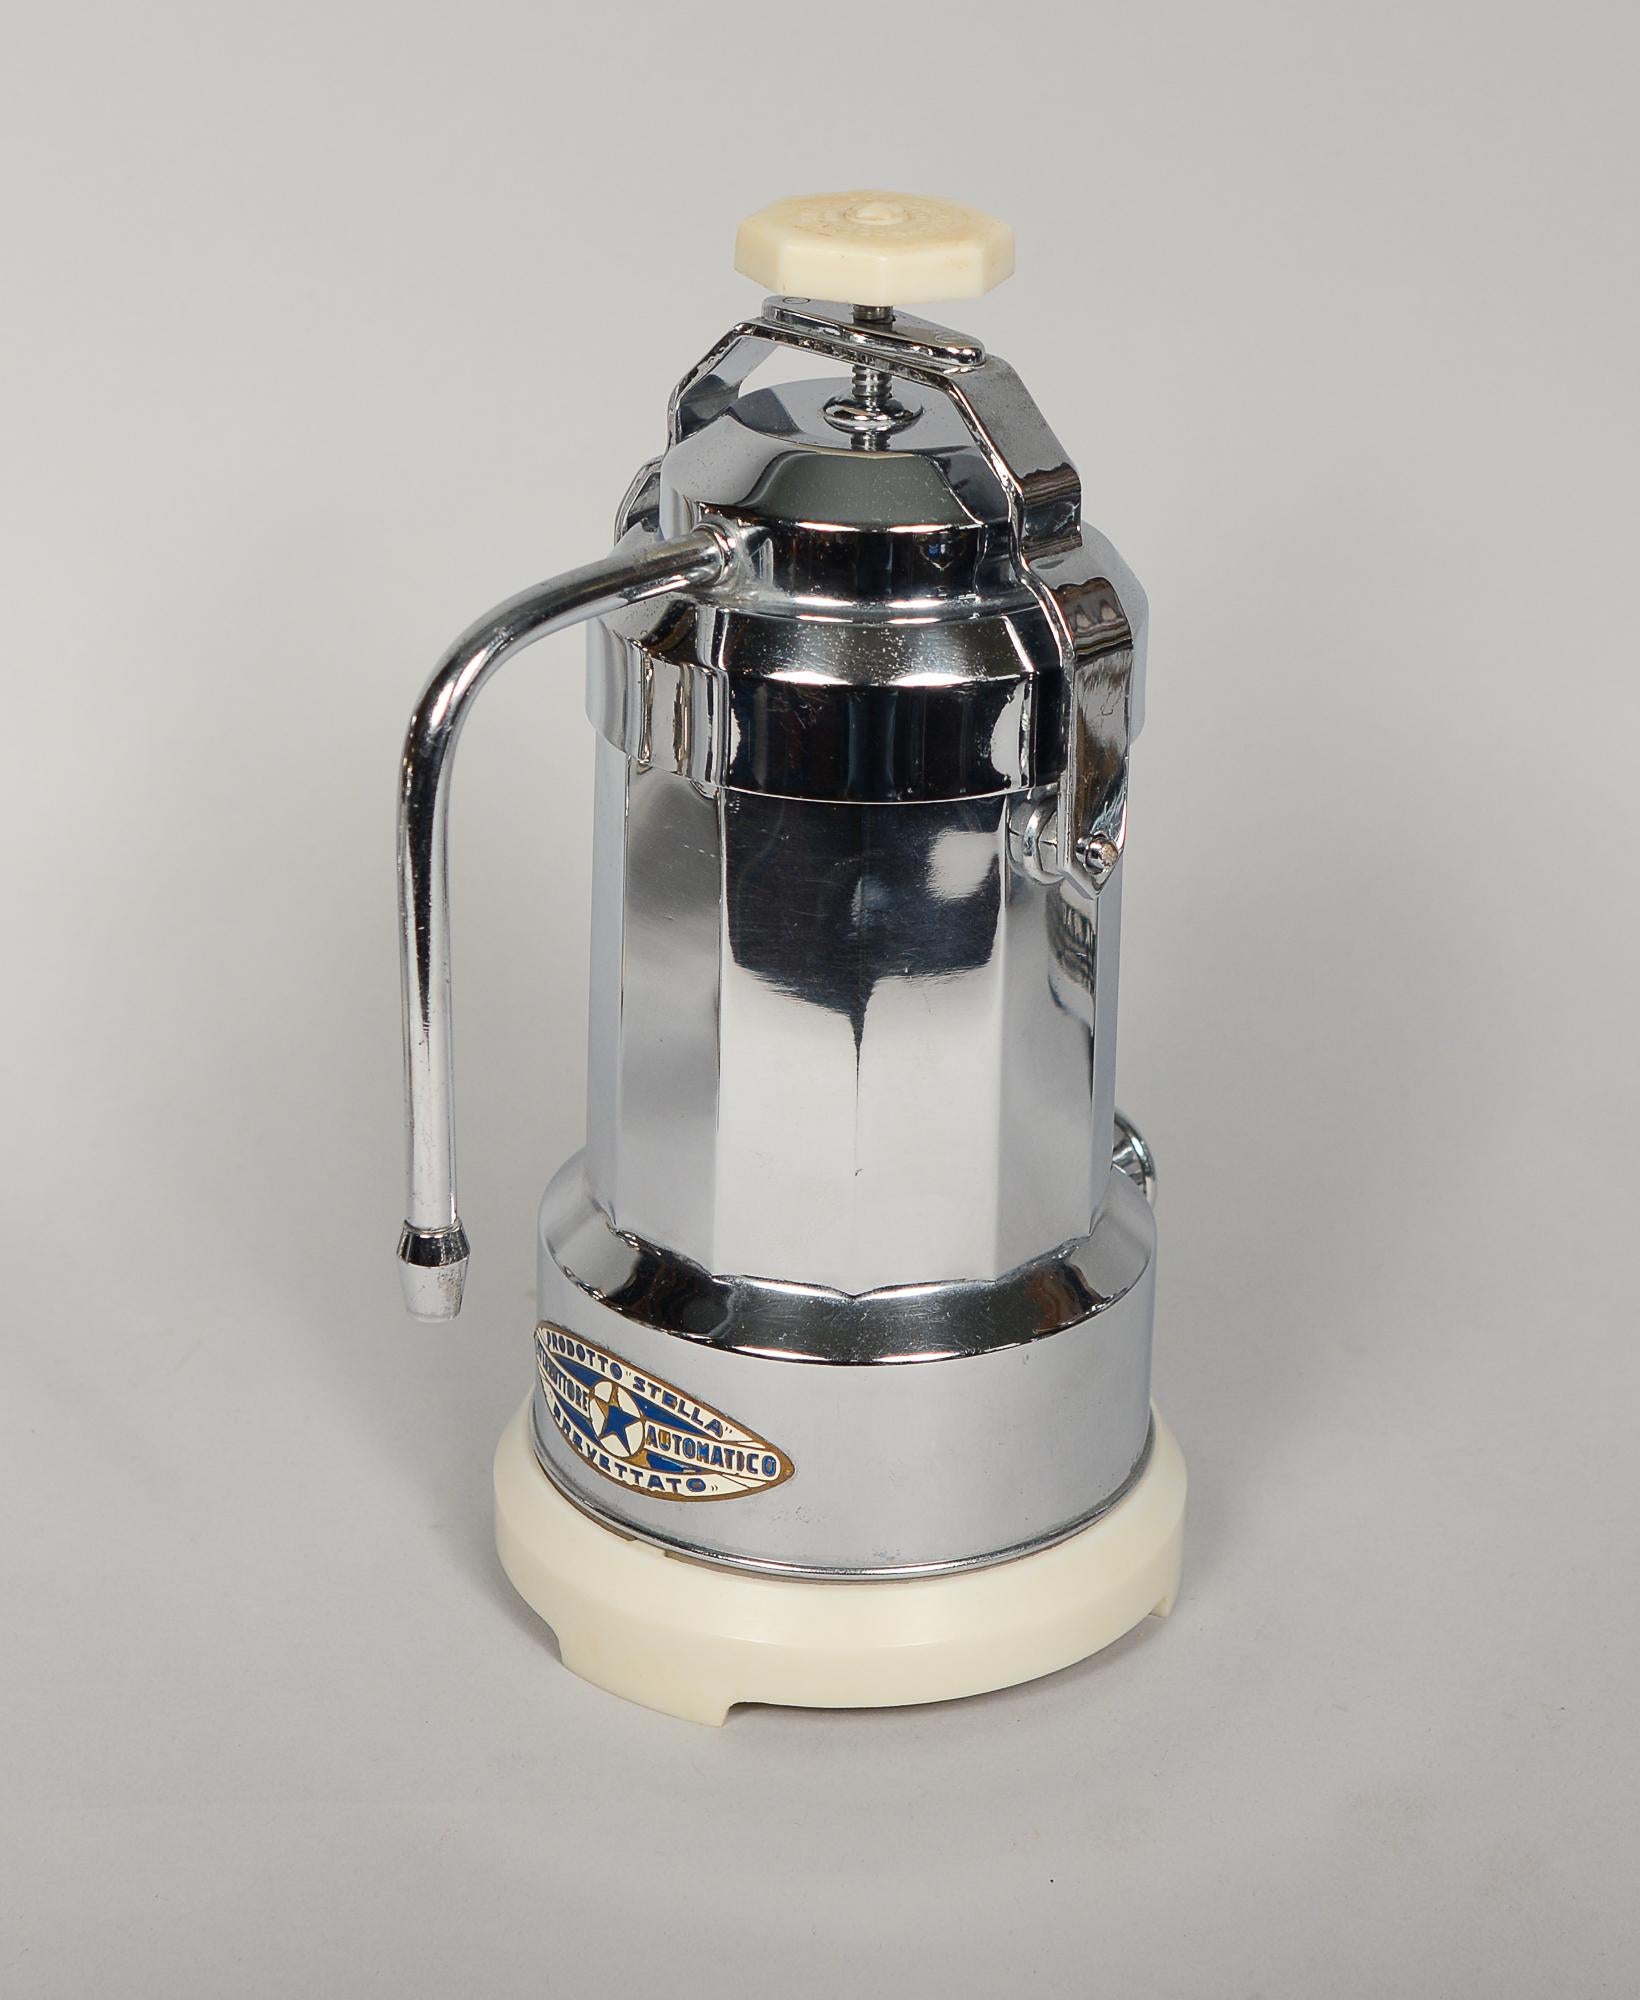 European Collection of Vintage Art Deco Espresso Makers in Chrome and Nickel Plate For Sale